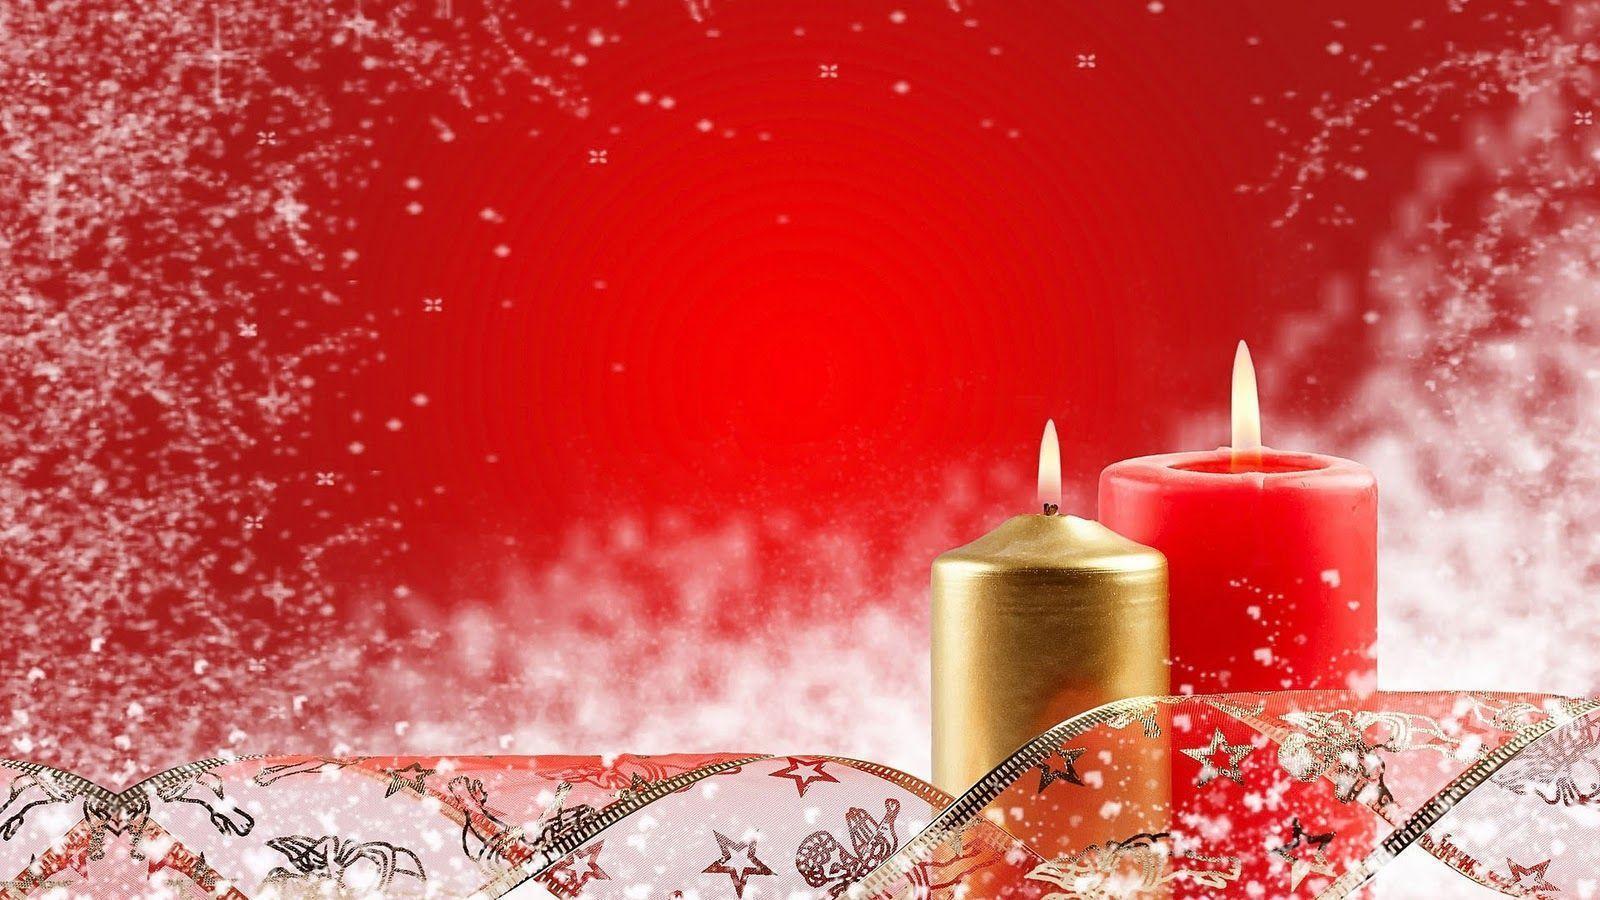 Beautiful Christmas Backgrounds - Wallpaper Cave